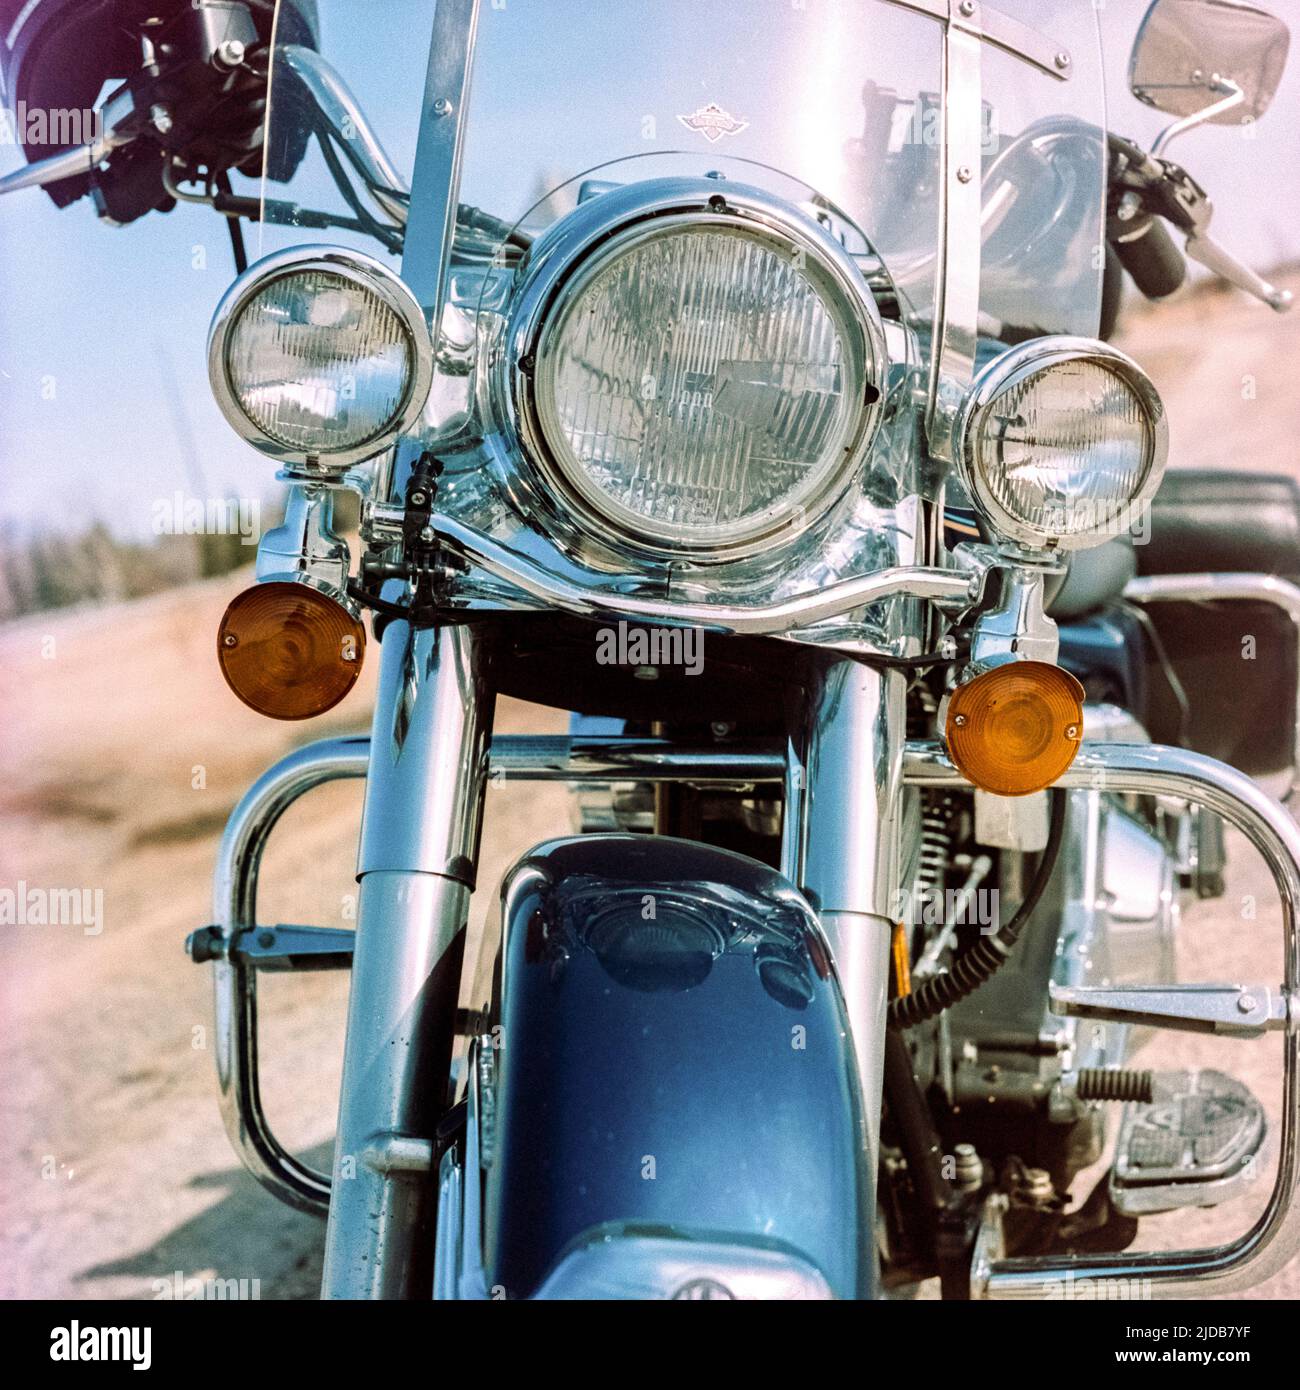 Riding a 25 year old Harley with expired film from 2003 in a 37 year old Hassy Stock Photo